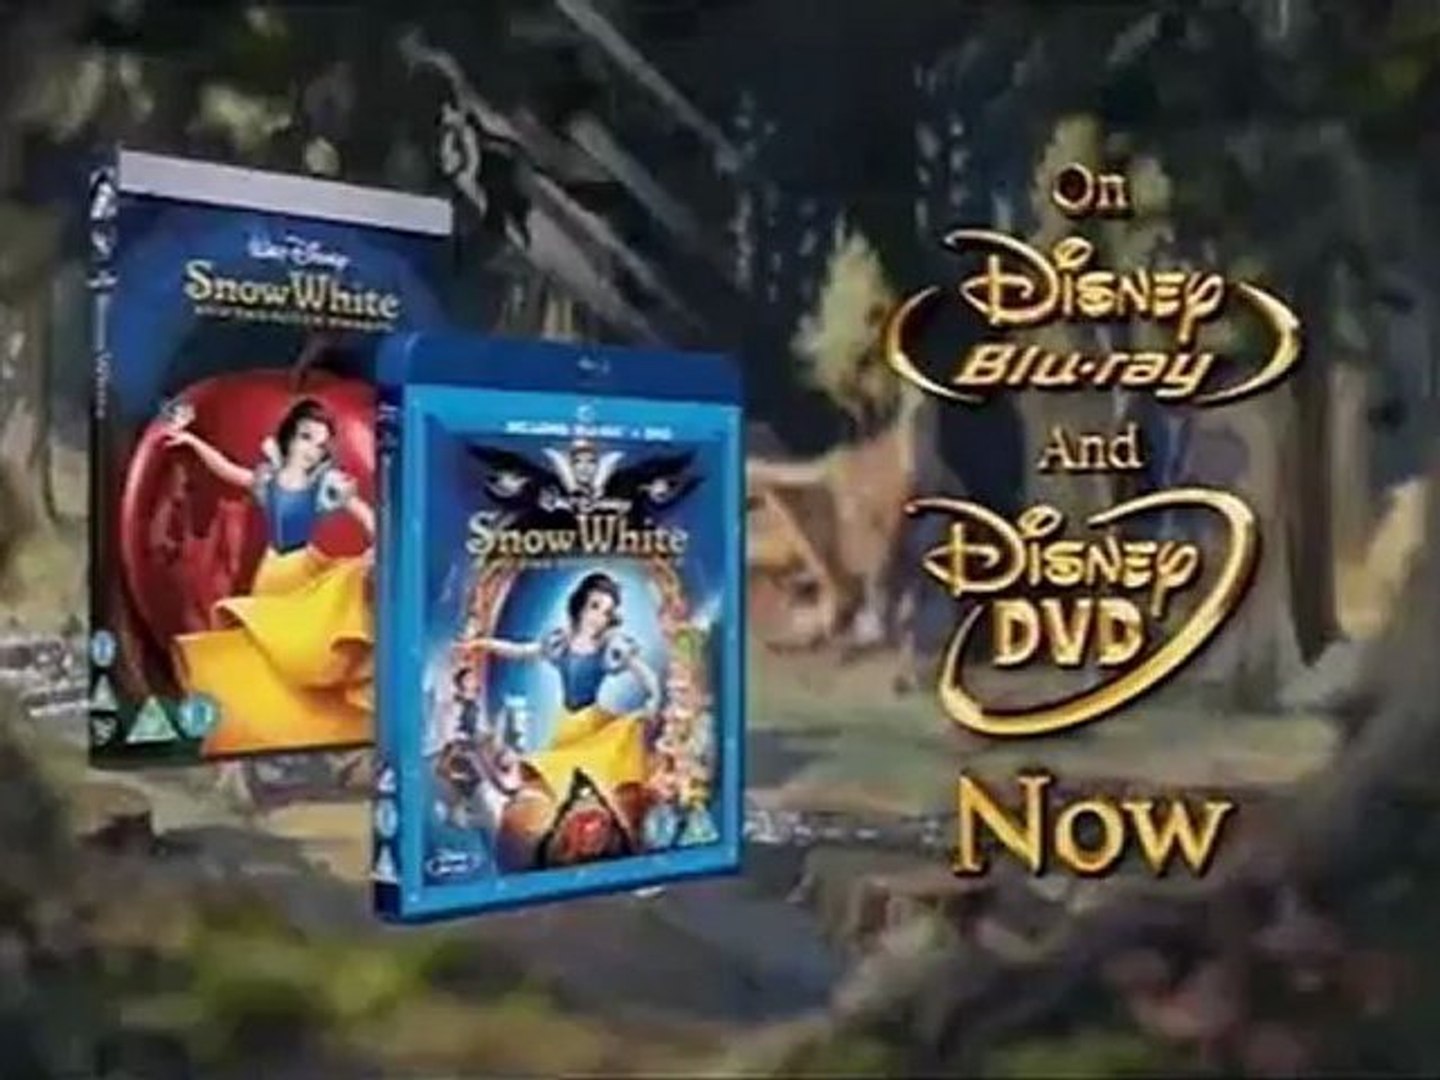 Snow White and the Seven Dwarfs DVD Release - TV Spot 2 - video Dailymotion